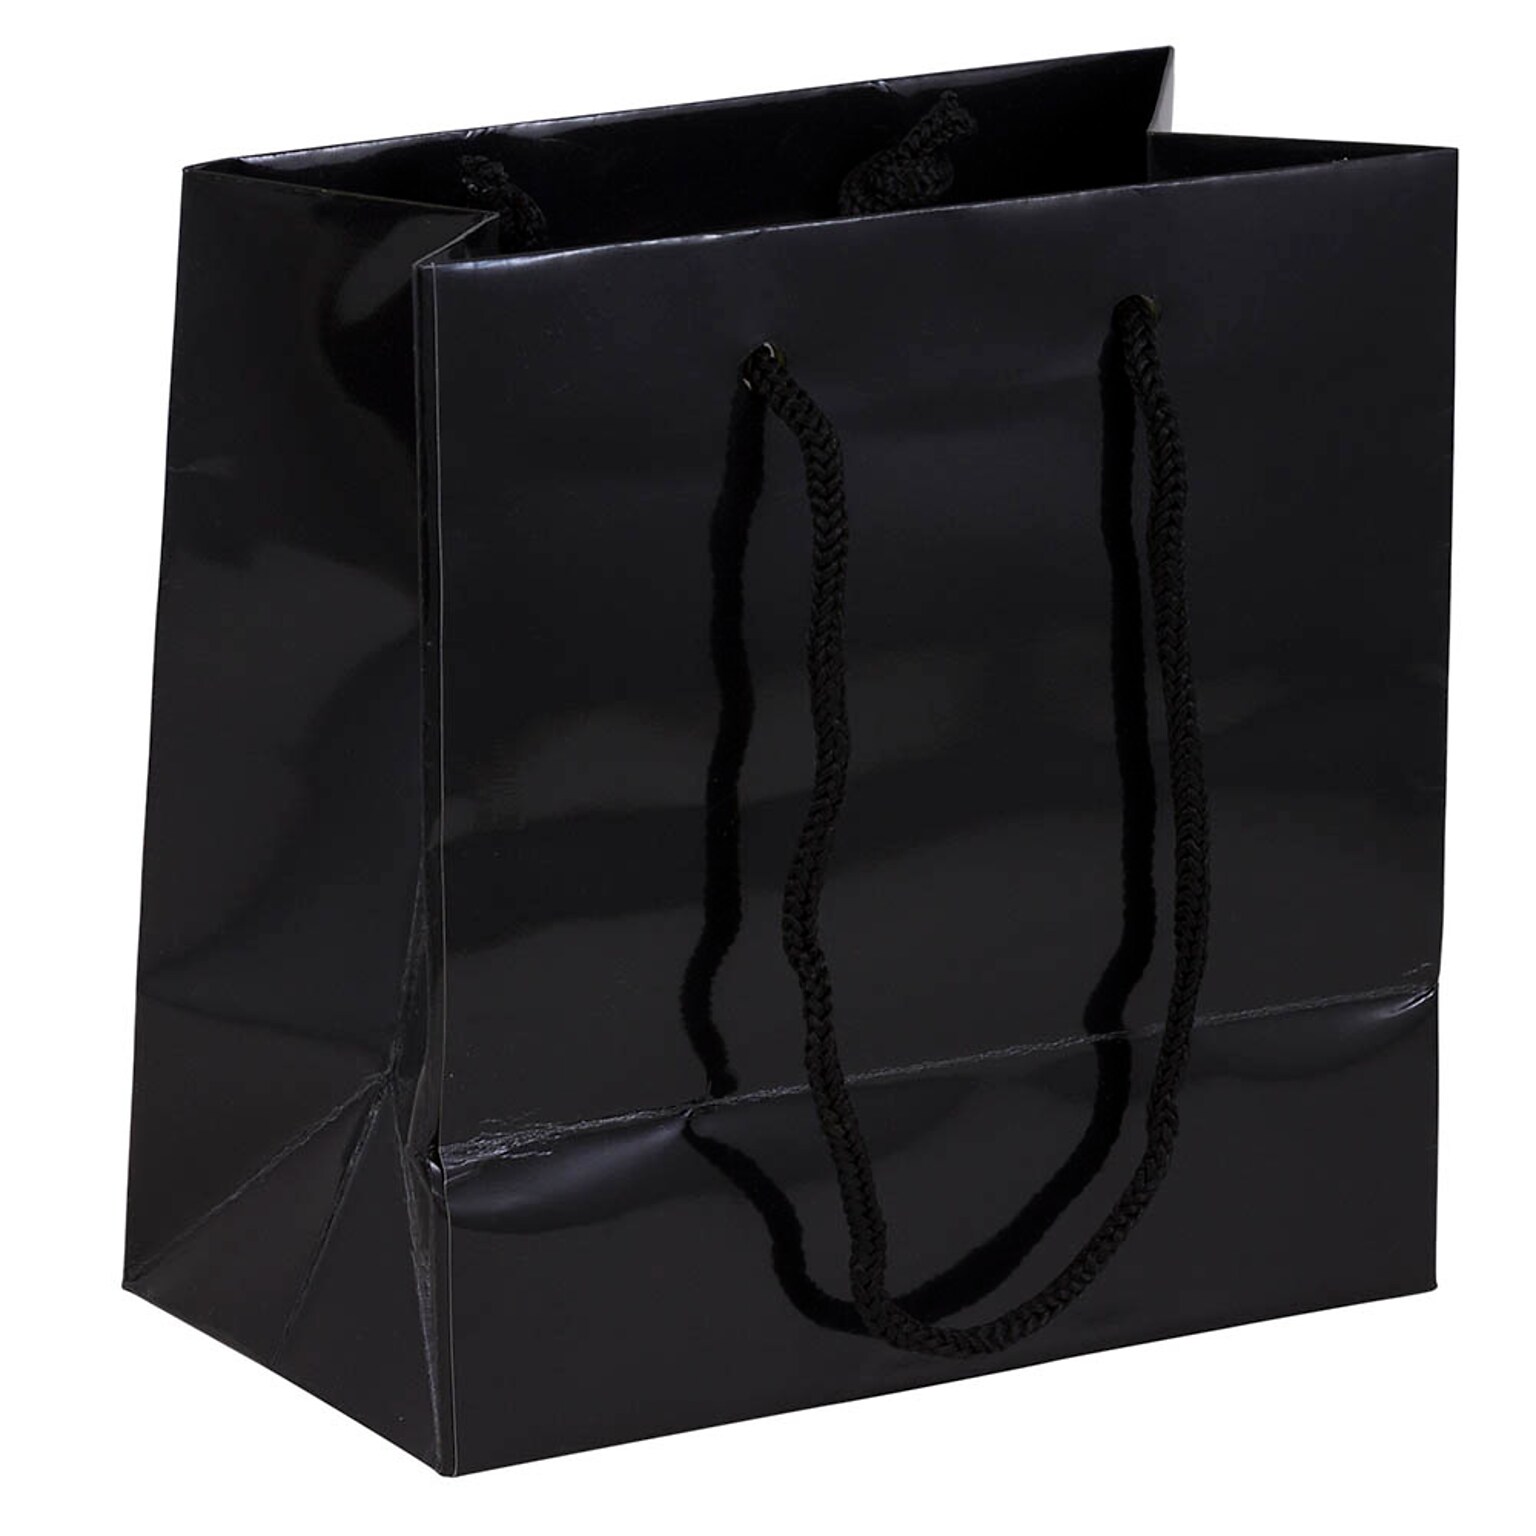 JAM Paper Glossy Gift Bag with Rope Handles, Small, Black, 3 Bags/Pack (896GLBLA)